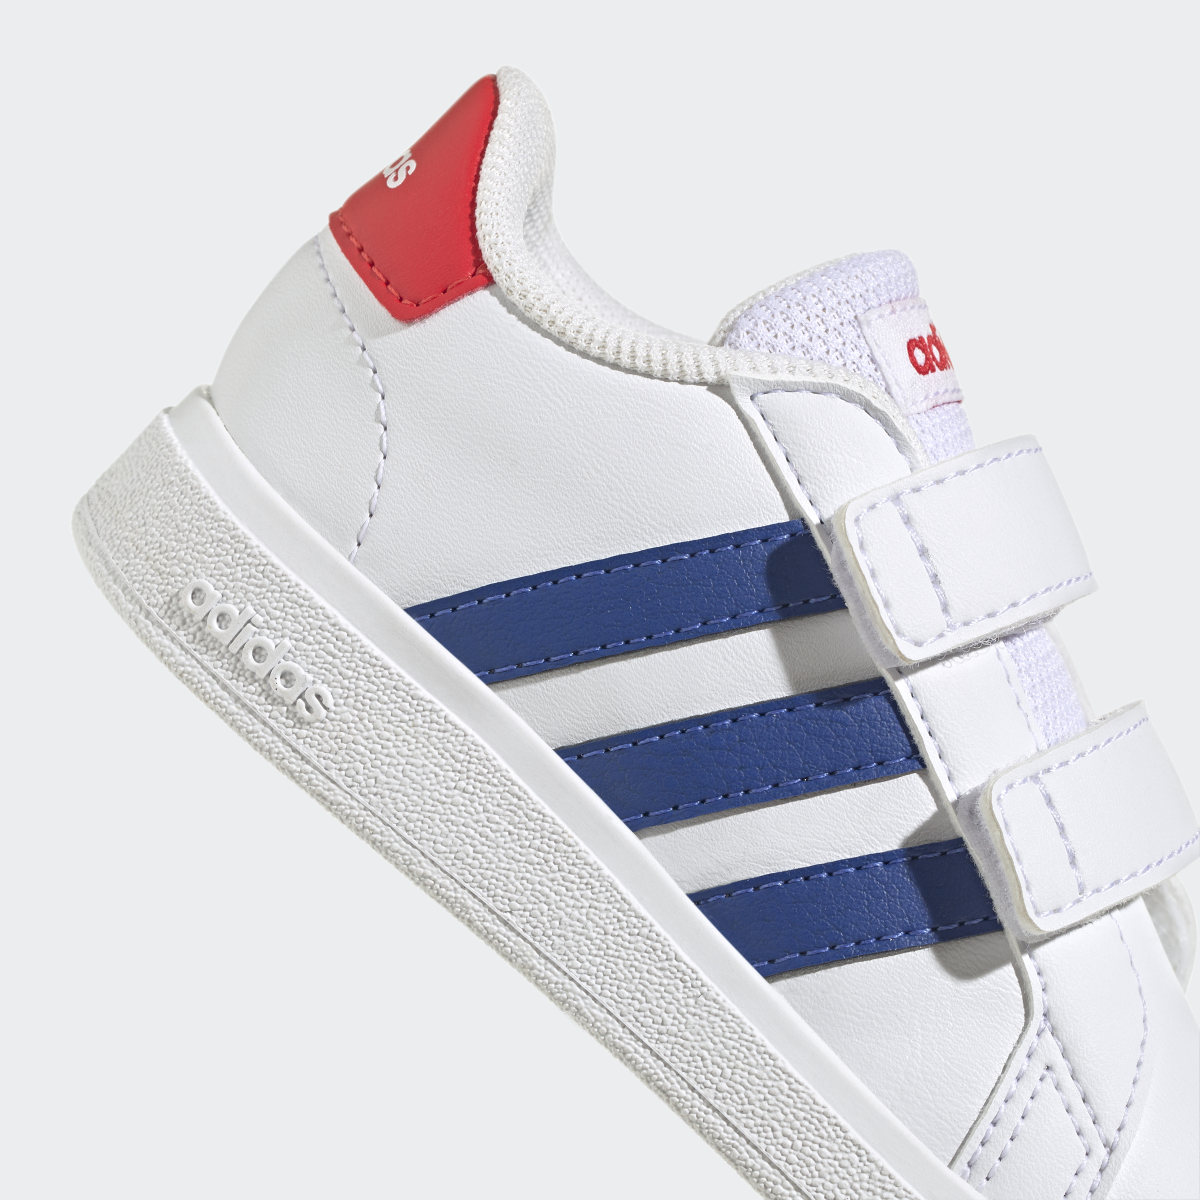 Adidas Grand Court Lifestyle Hook and Loop Shoes. 9